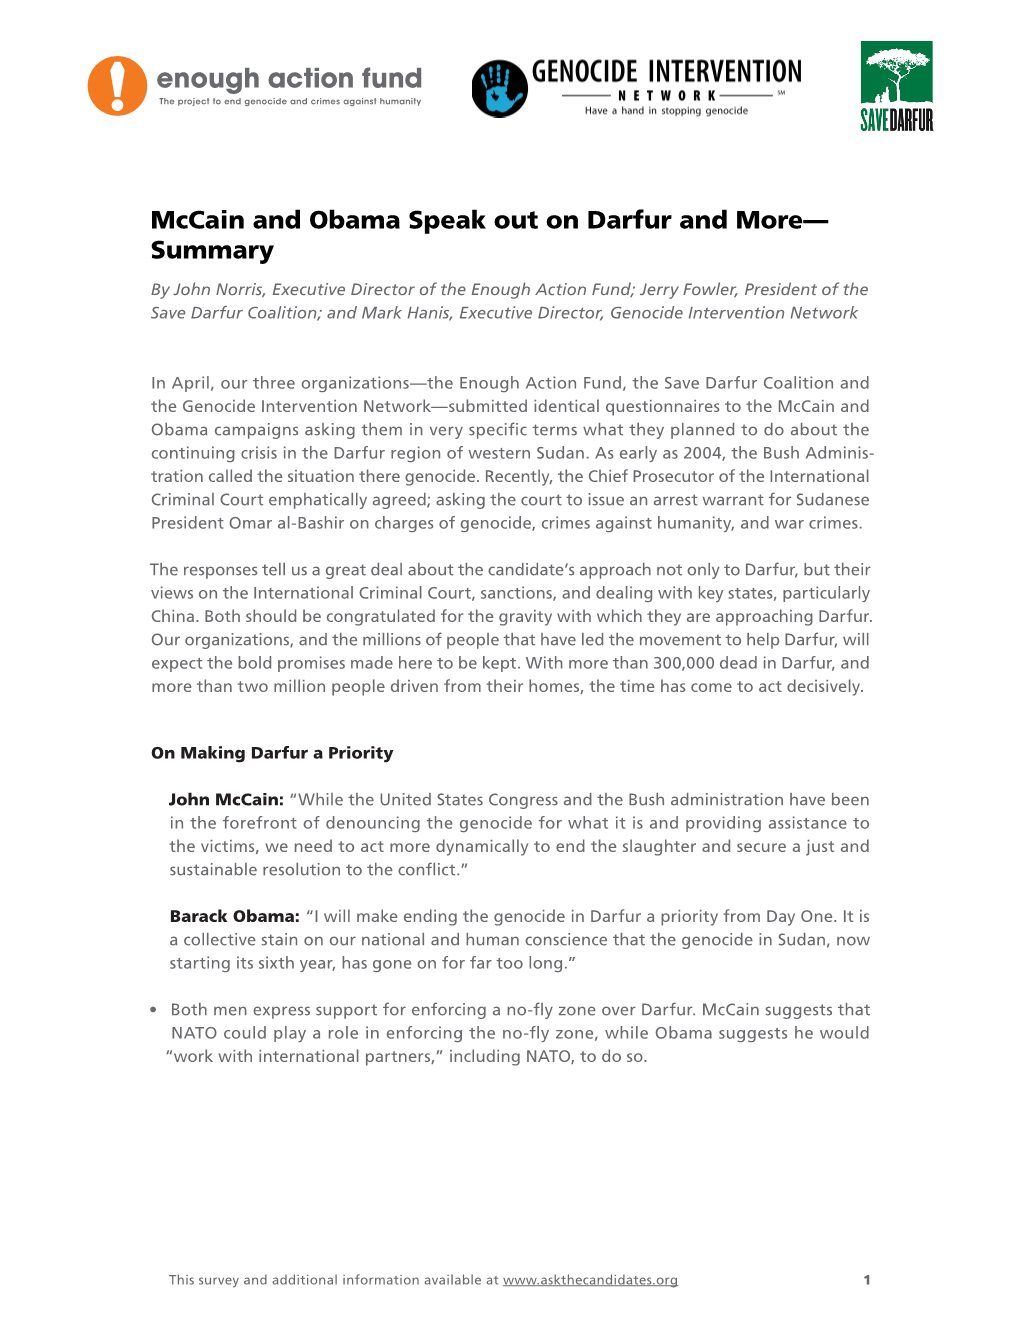 Mccain and Obama Speak out on Darfur and More— Summary